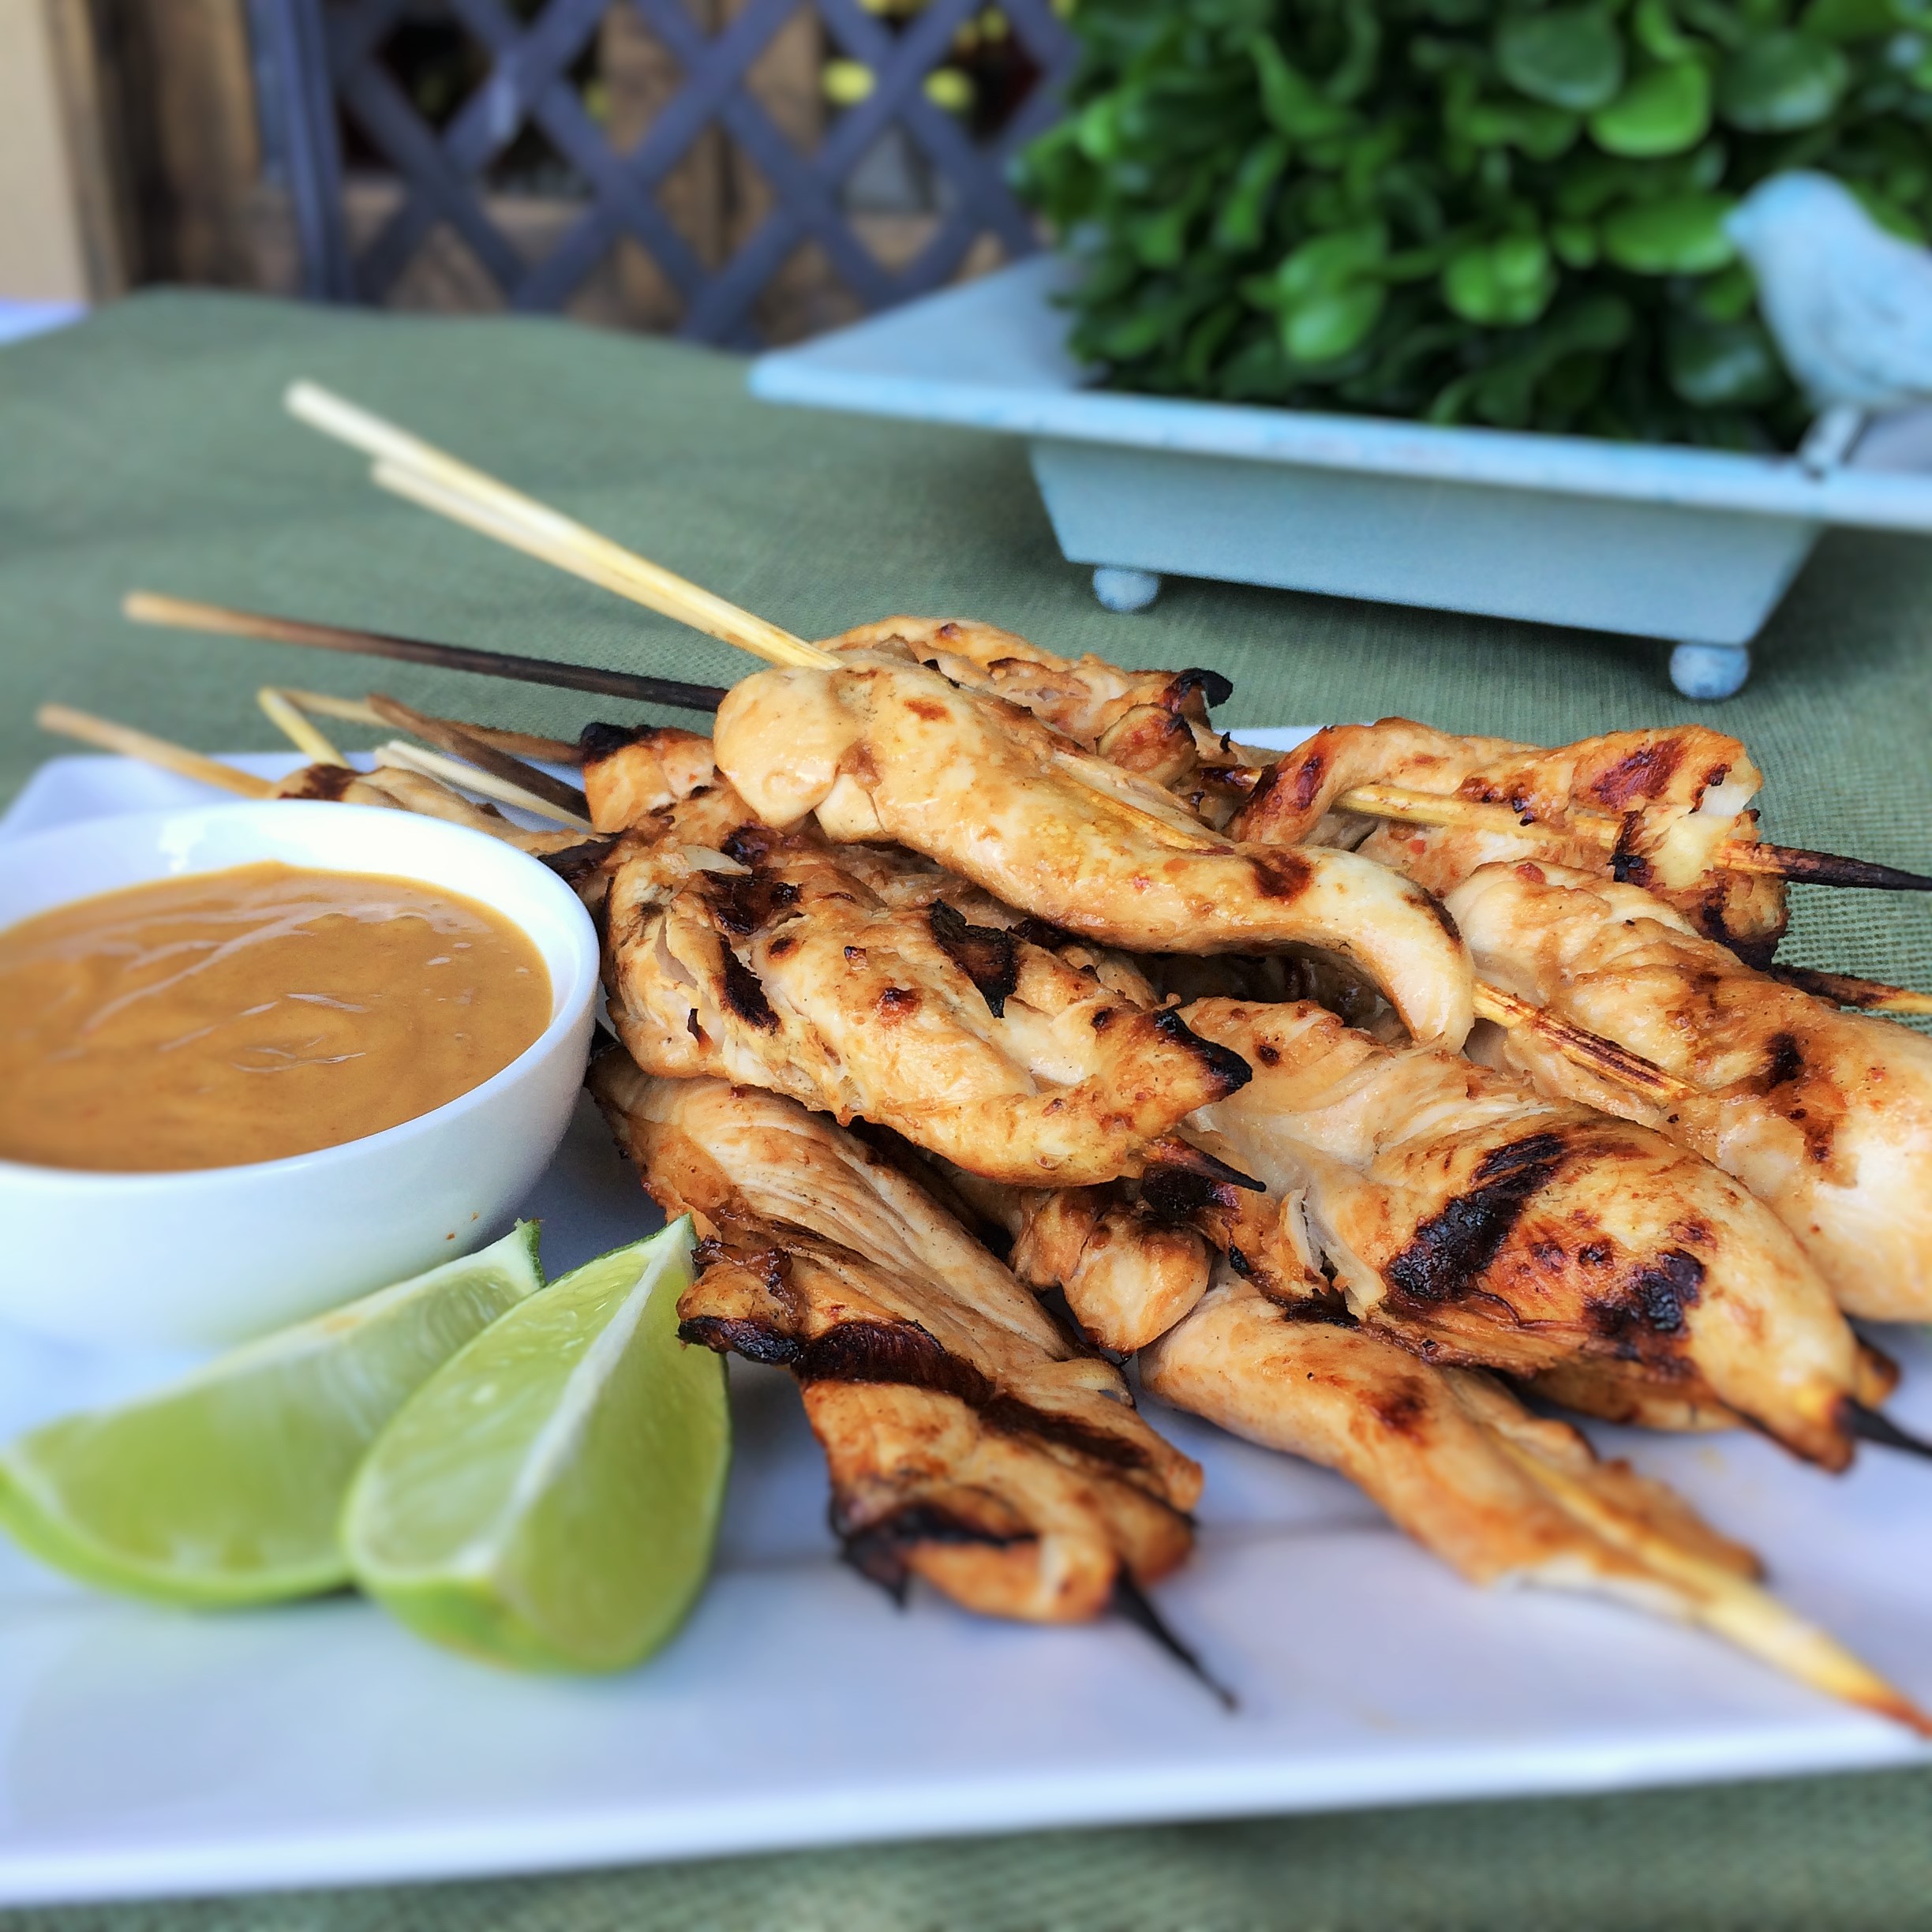 Thai Chicken Satay With Spicy Peanut Sauce Karen Mangum Nutrition,How To Make A Duct Tape Wallet